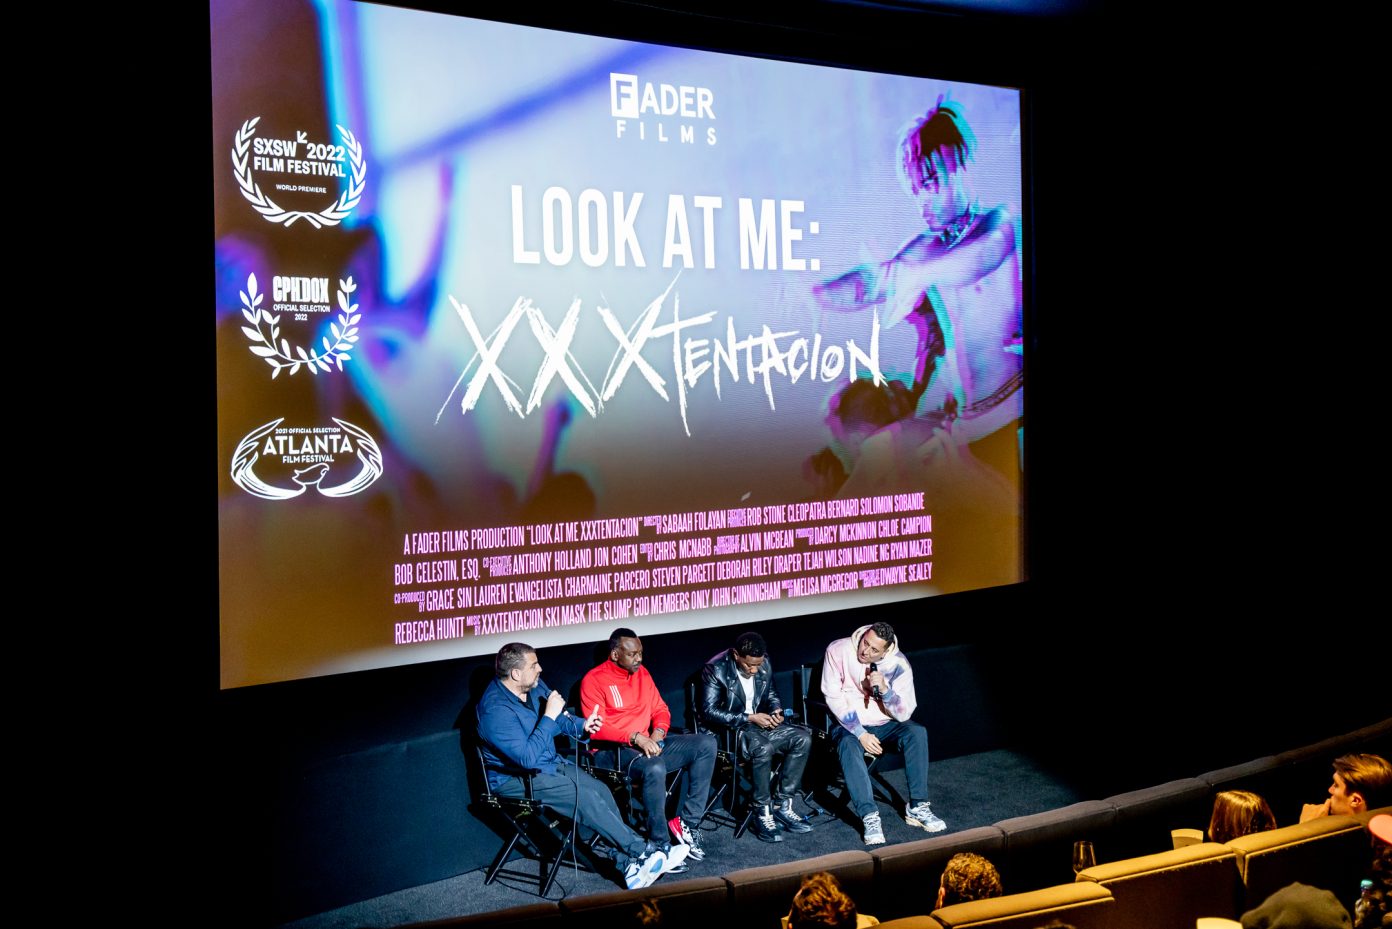 Dj Semtex Hosts An Exclusive Q&Amp;A During A Special Movie Showing Of &Quot;Look At Me: Xxxtentacion&Quot; In London, Yours Truly, News, November 28, 2023